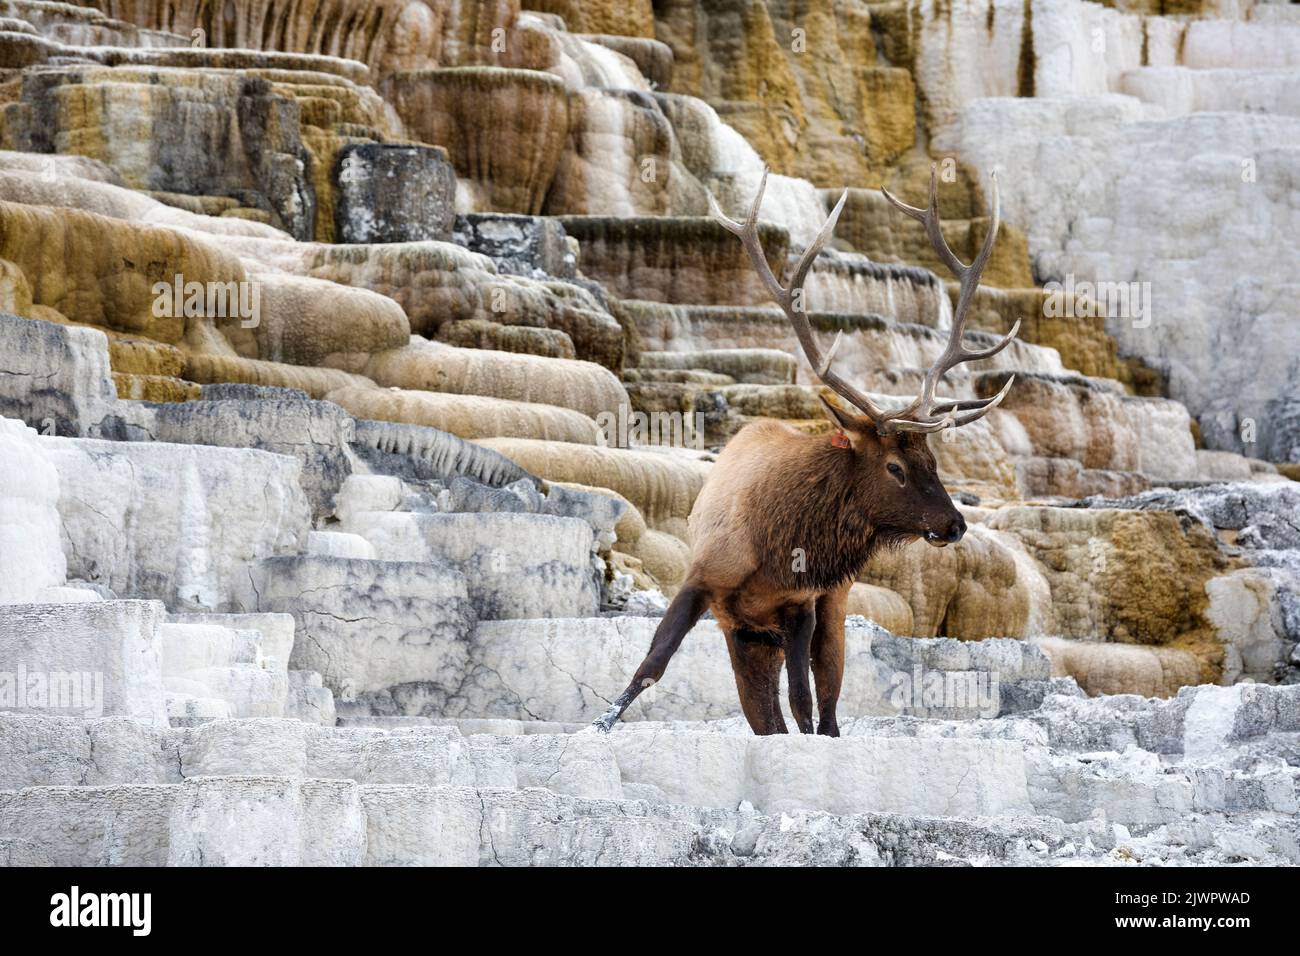 WY05054-00..... WYOMING - Bull Elk (Cervus canadensis) Yellowstone National Park, Mammoth Hot Springs Area. Stockfoto